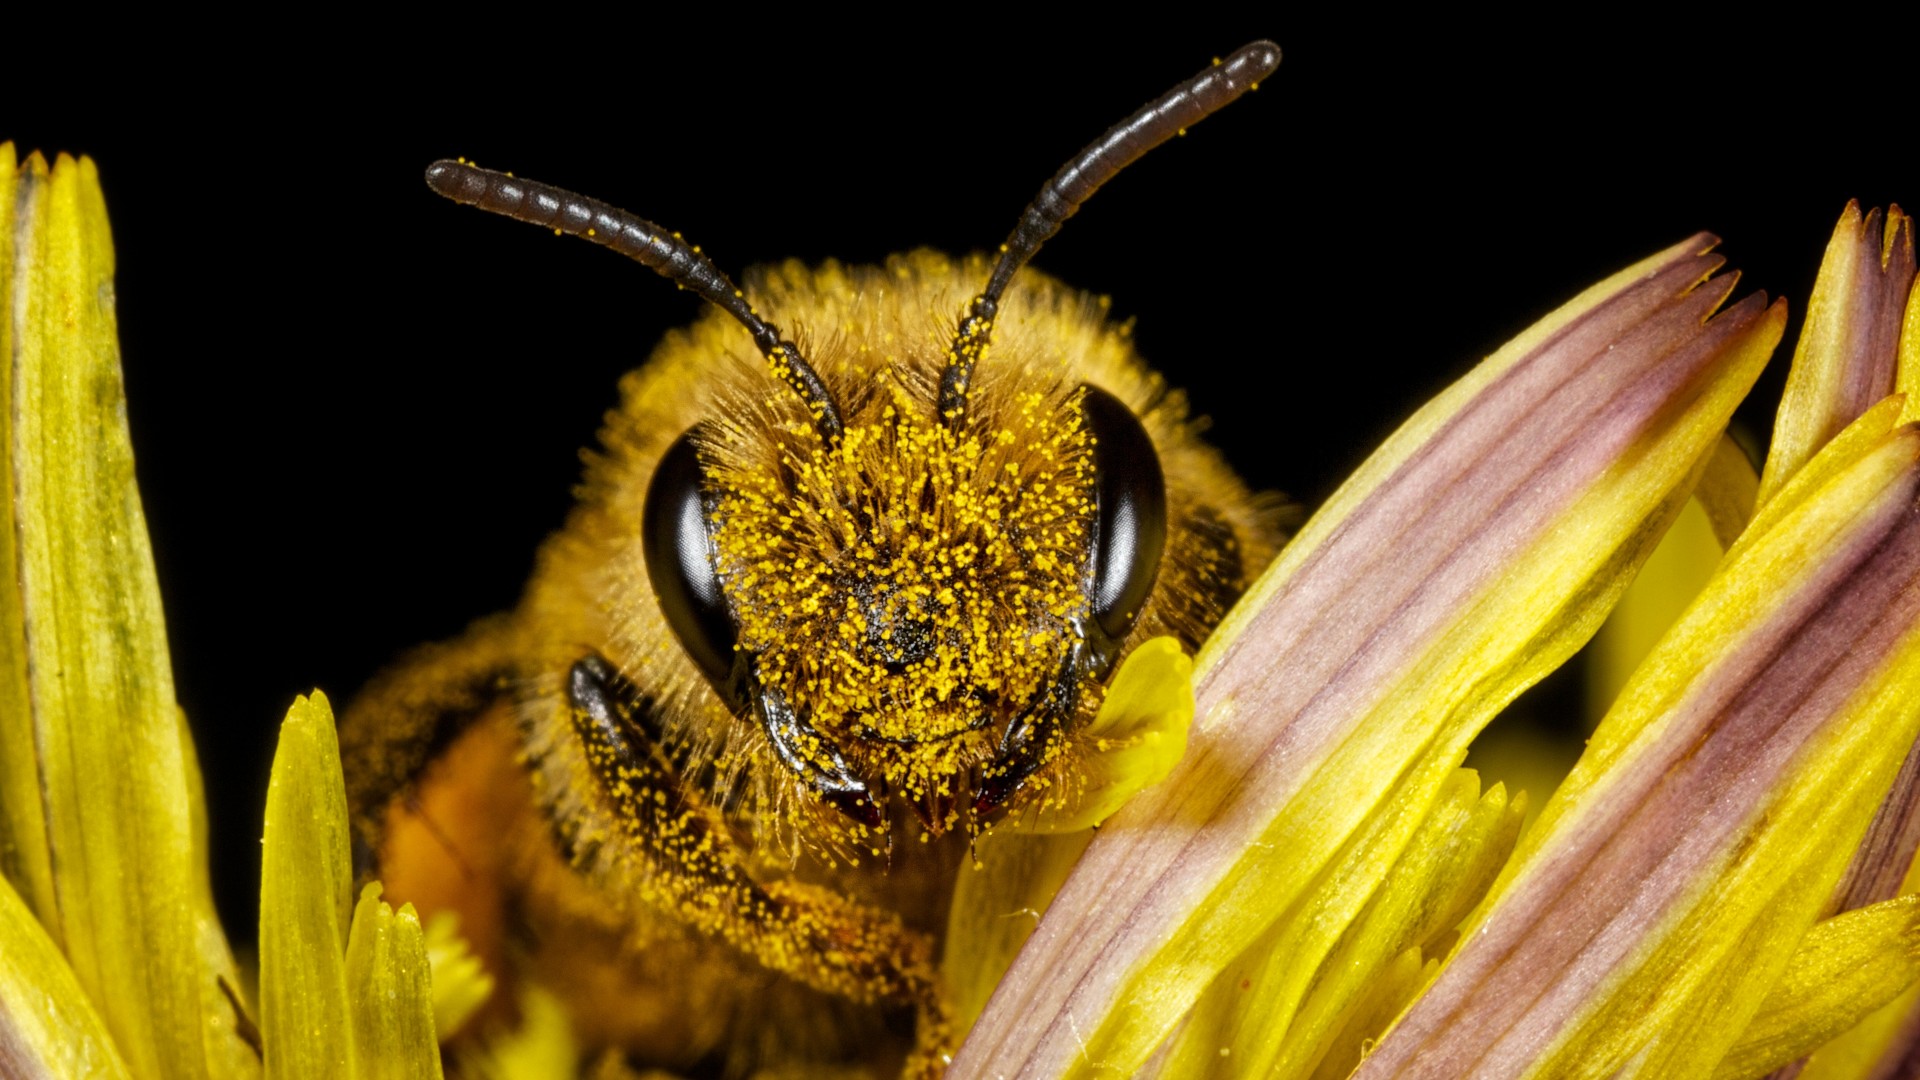 An extreme close-up of honey bee (apis mellifera). The bee is facing the camera and is covered in yellow pollen. It is sitting on a pink and yellow flower.